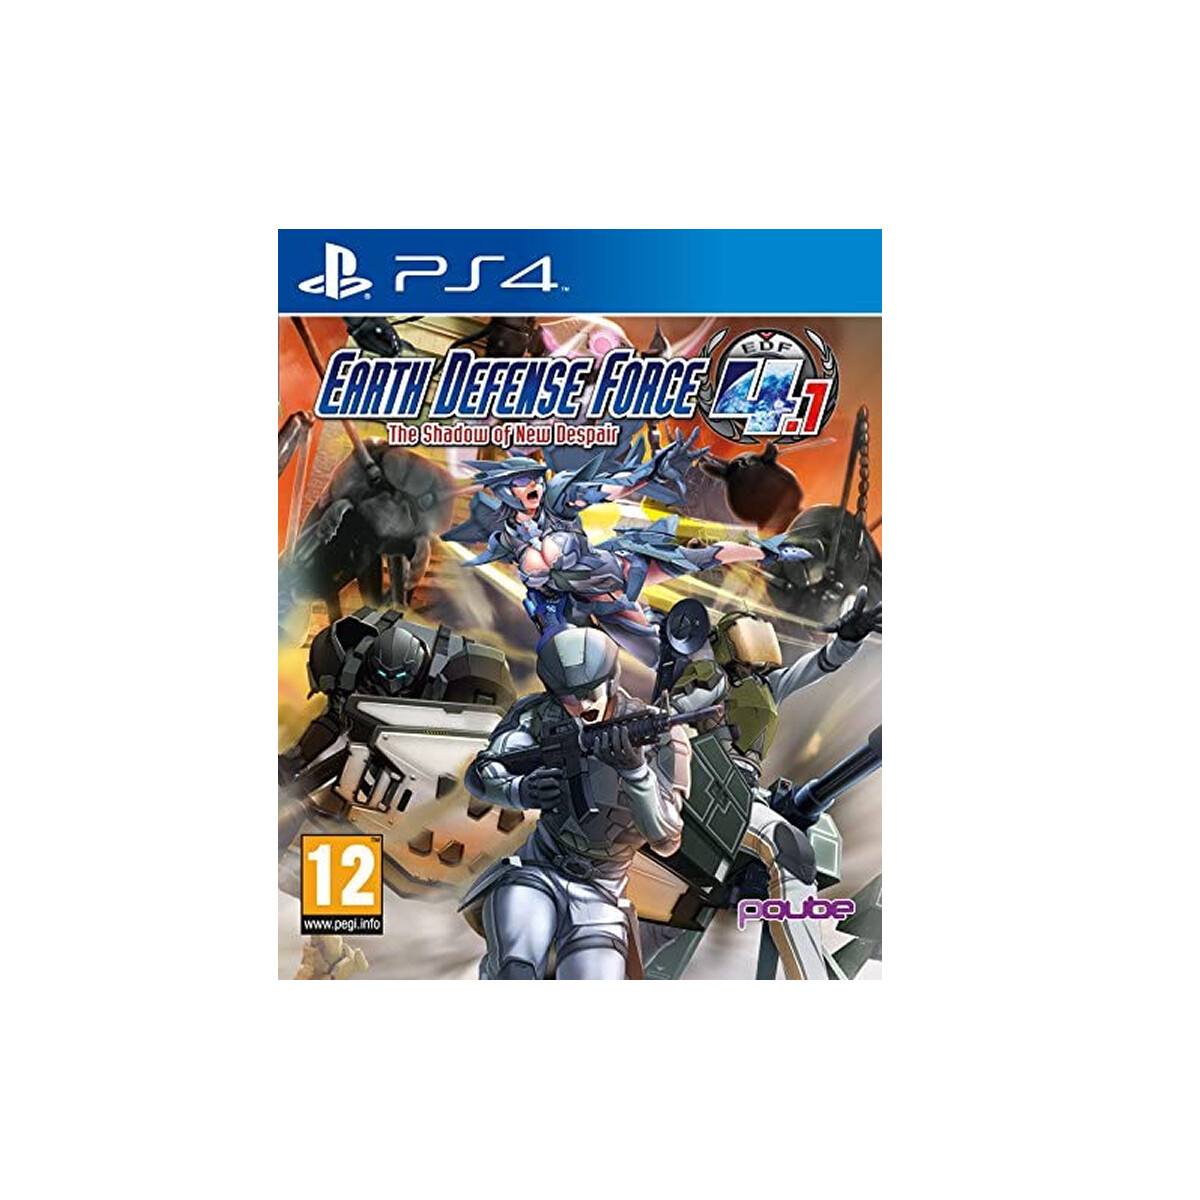 PS4 EARTH DEFENSE FORCE 4.1 